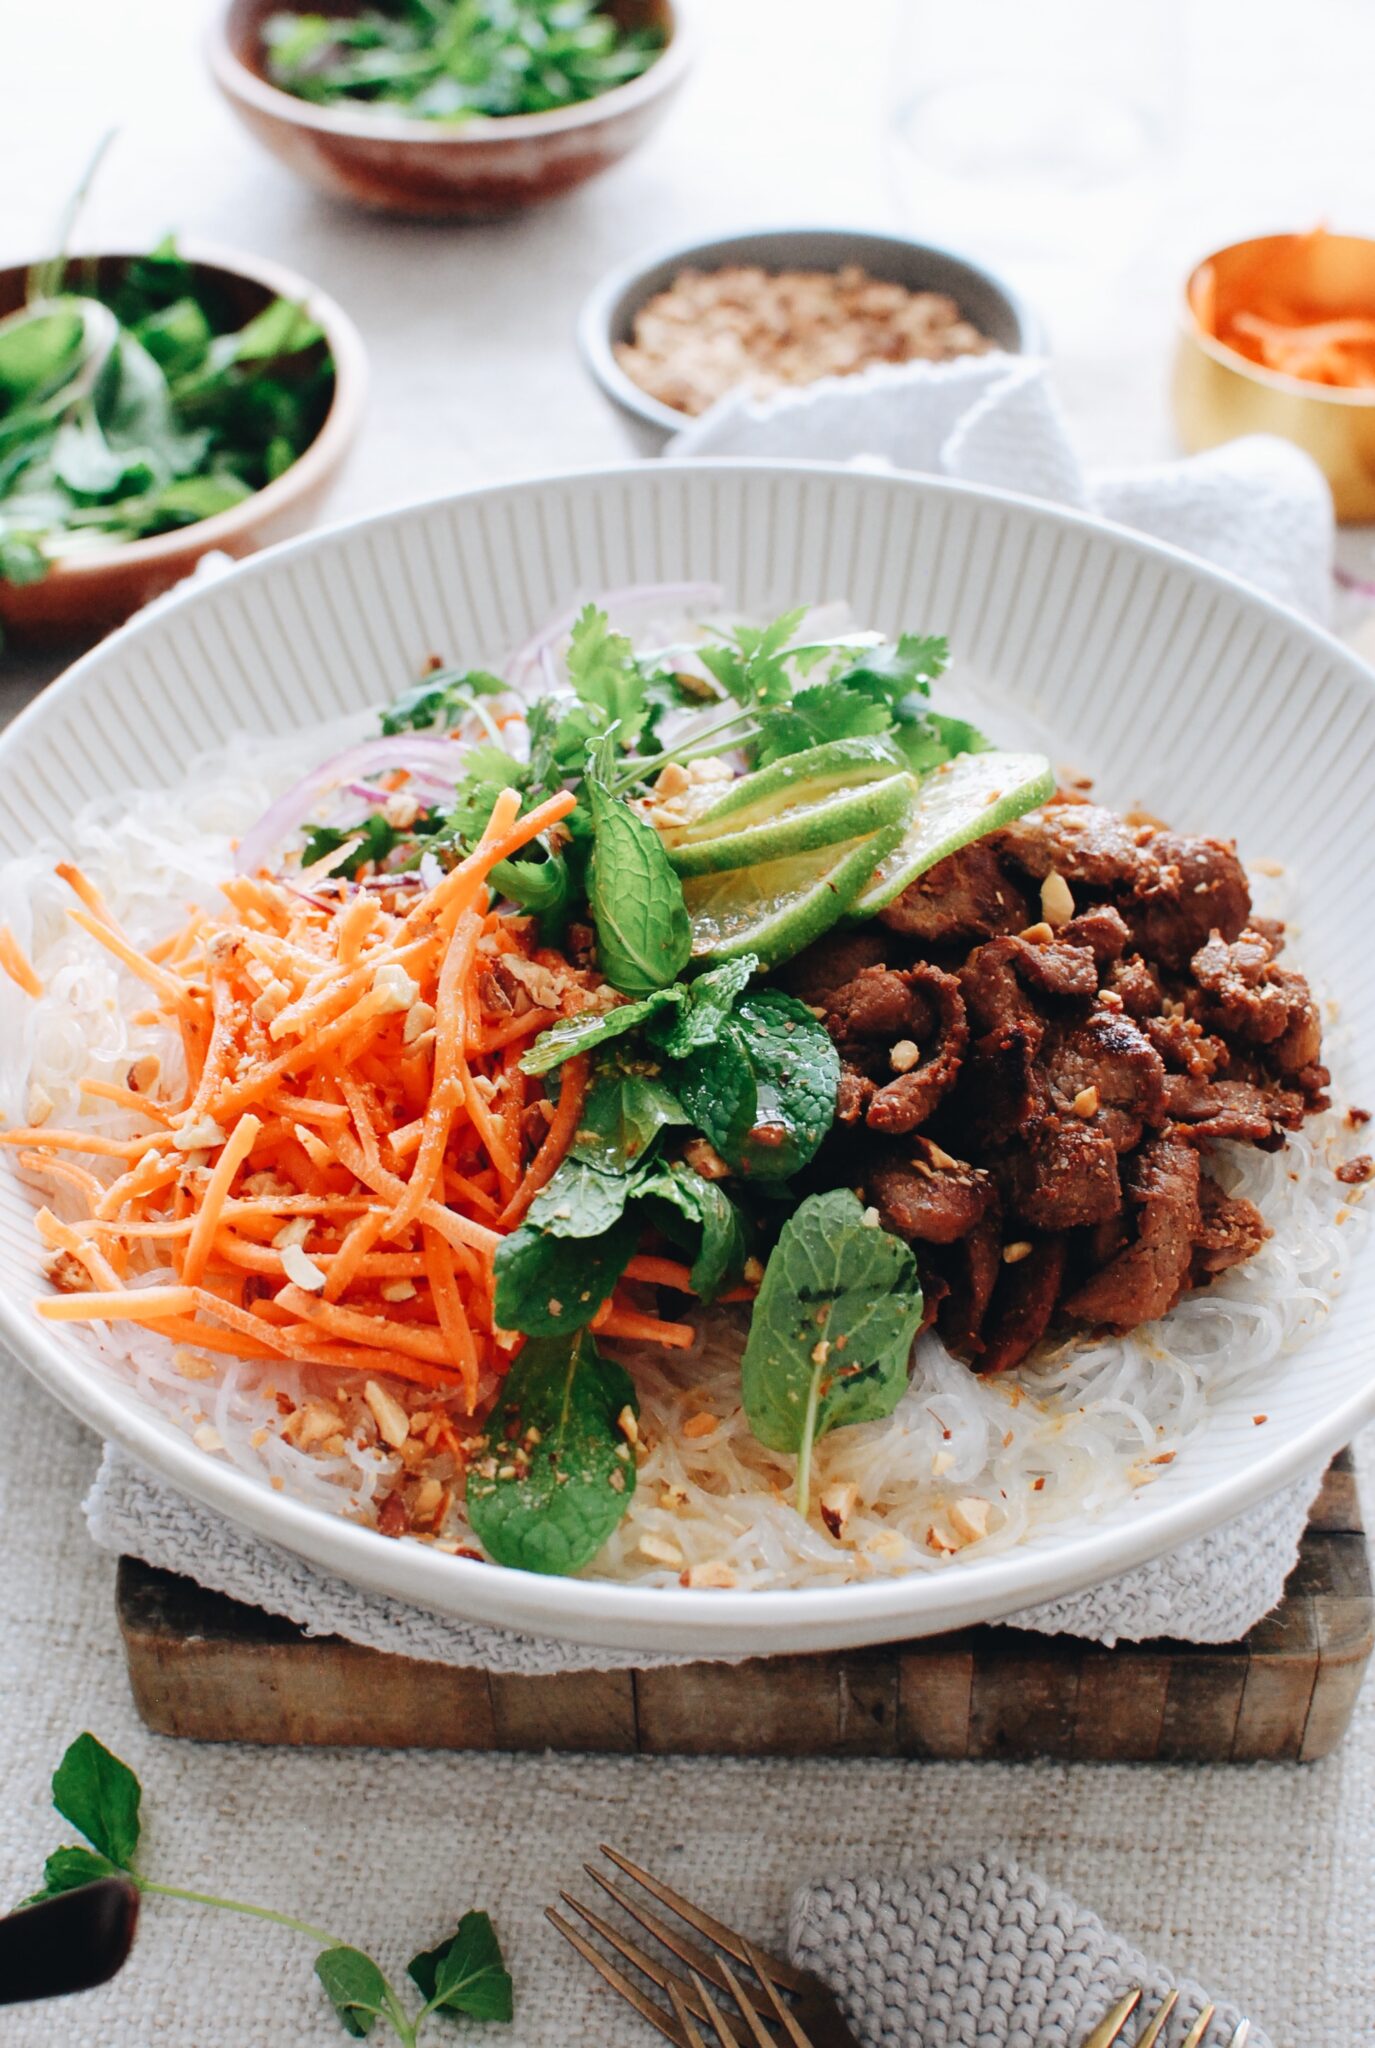 Asian Pork Bowls with Noodles and Veggies - Bev Cooks